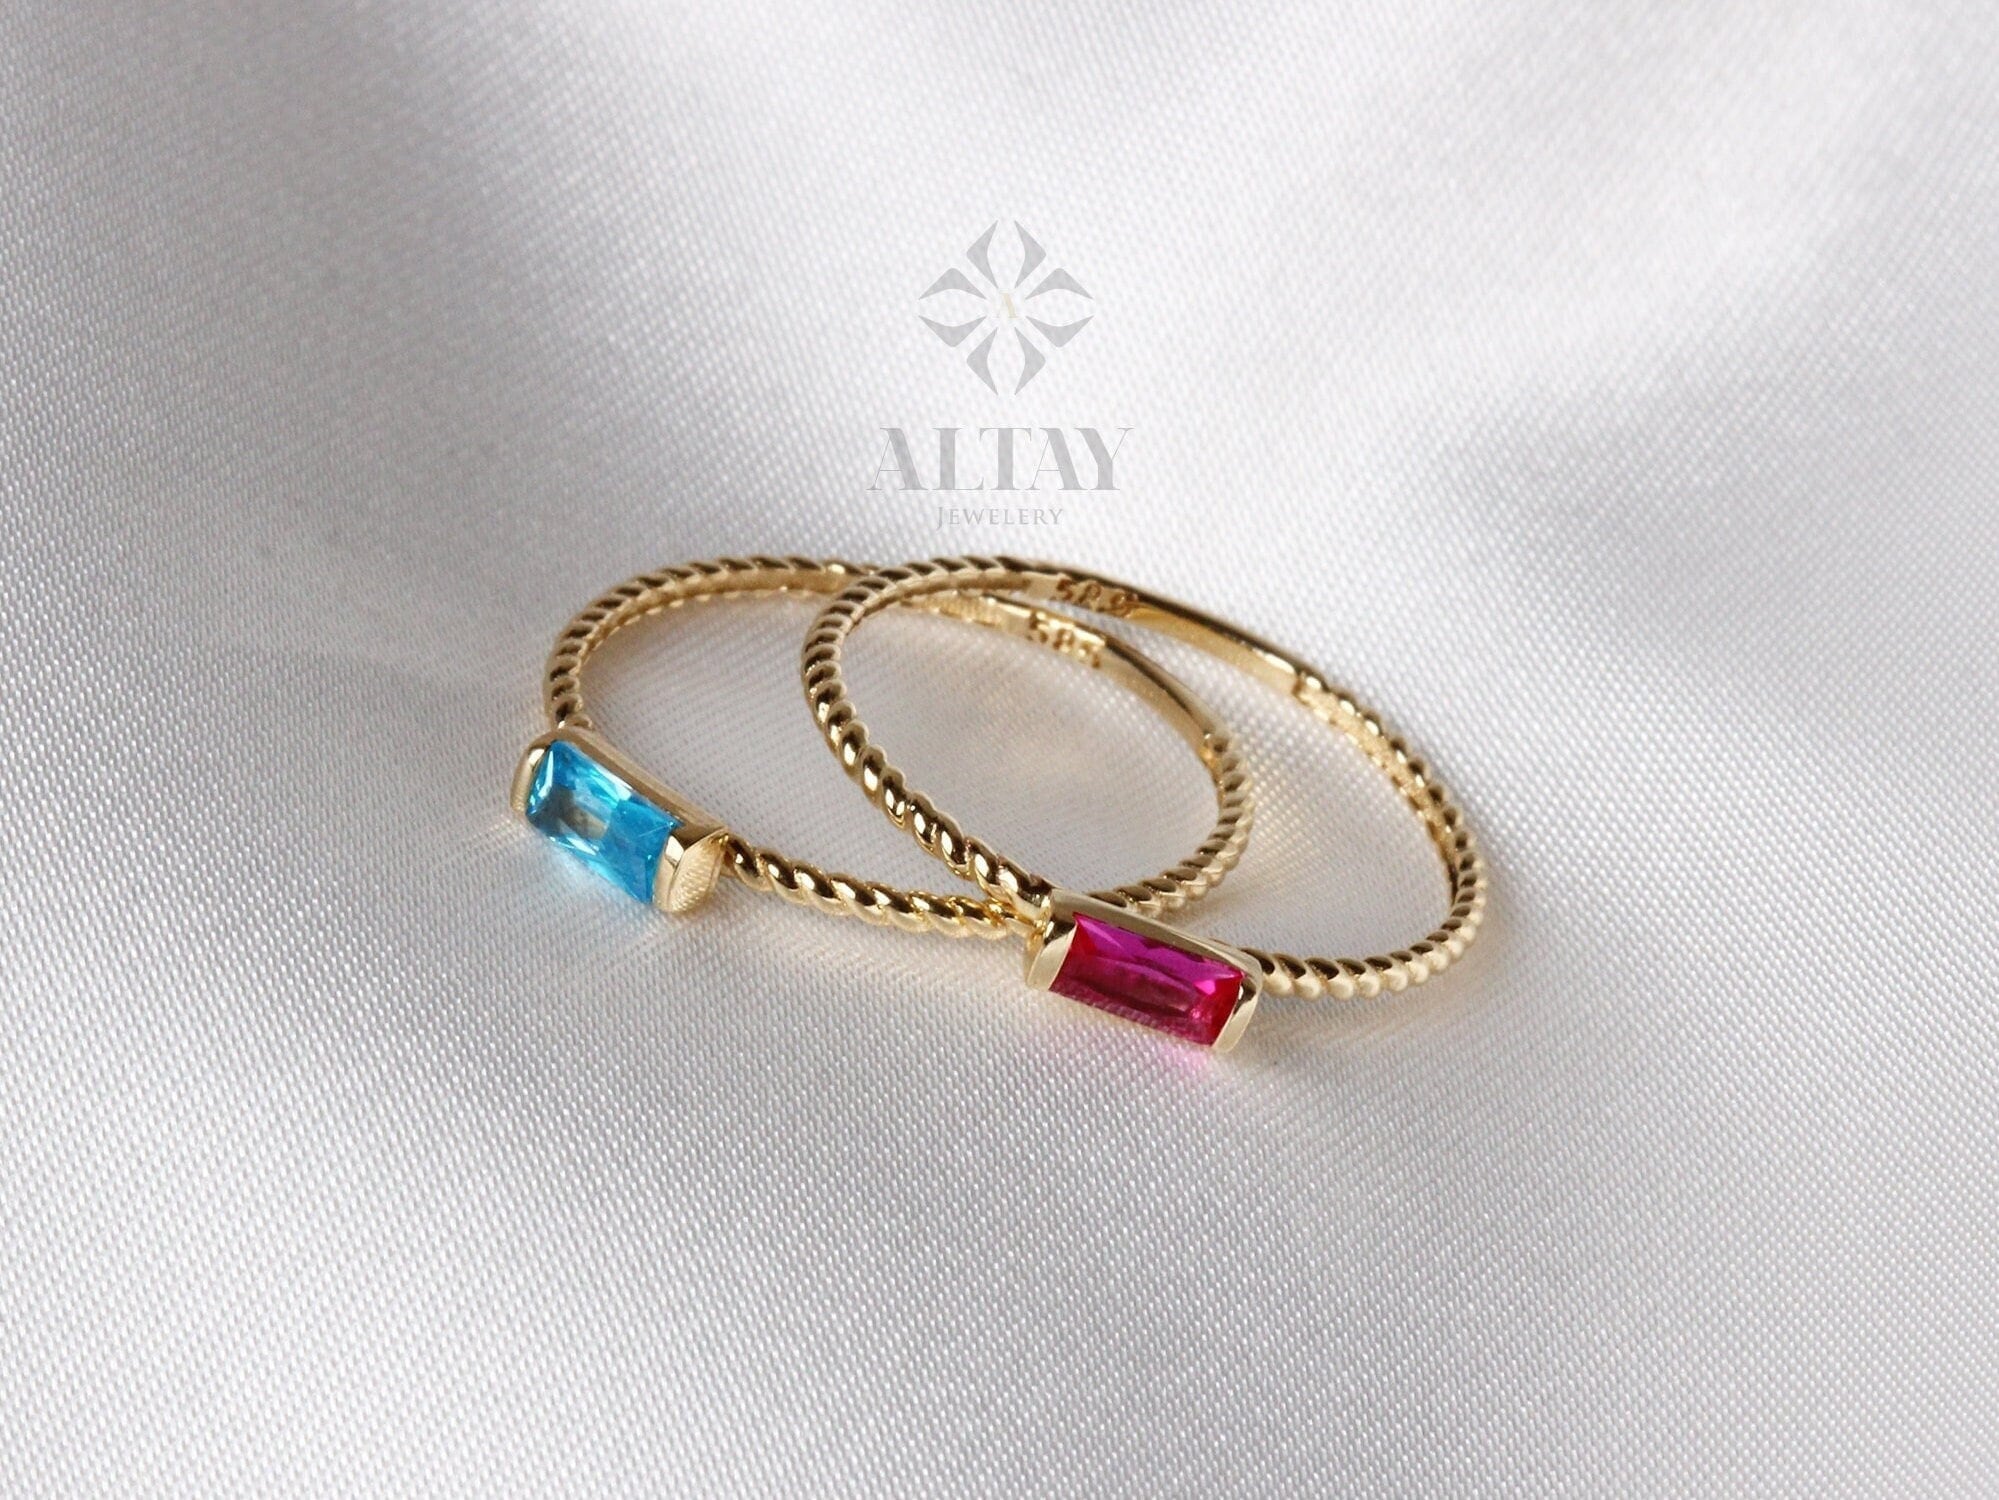 14K Solid Gold Baguette Ring, London Blue Topaz Ring, Ruby Stacking Ring, Aquamarine Dainty Wedding Ring, Tiny Stackable Ring, Gift For Her